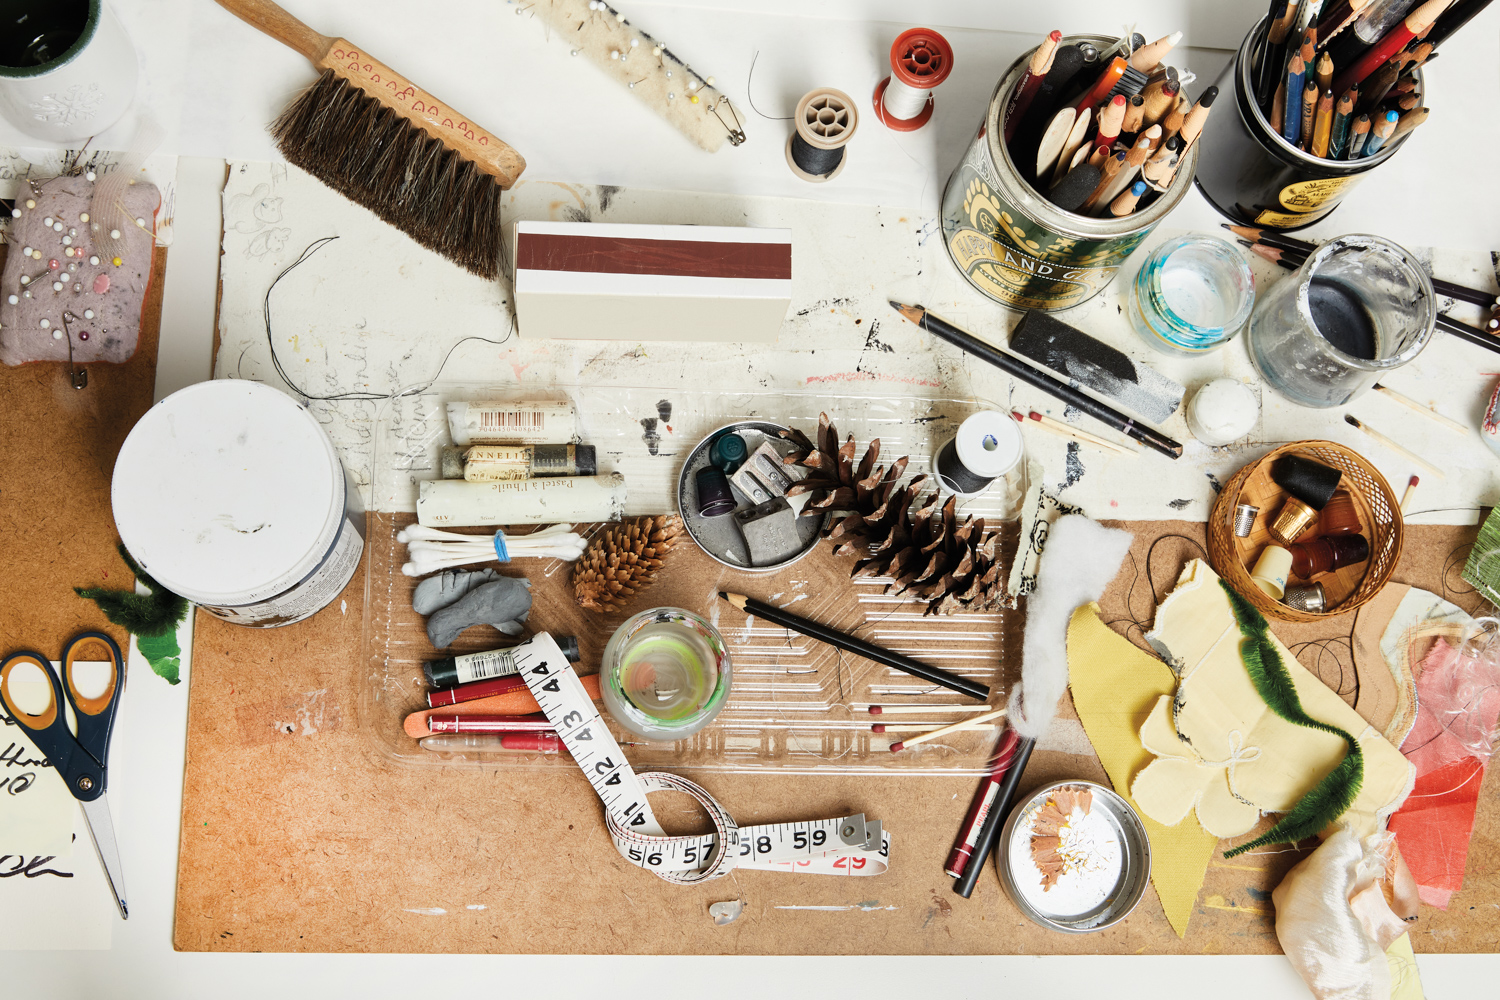 An overview of an artist's table with pencils, embroidery thread, a measuring tape and other art supplies.